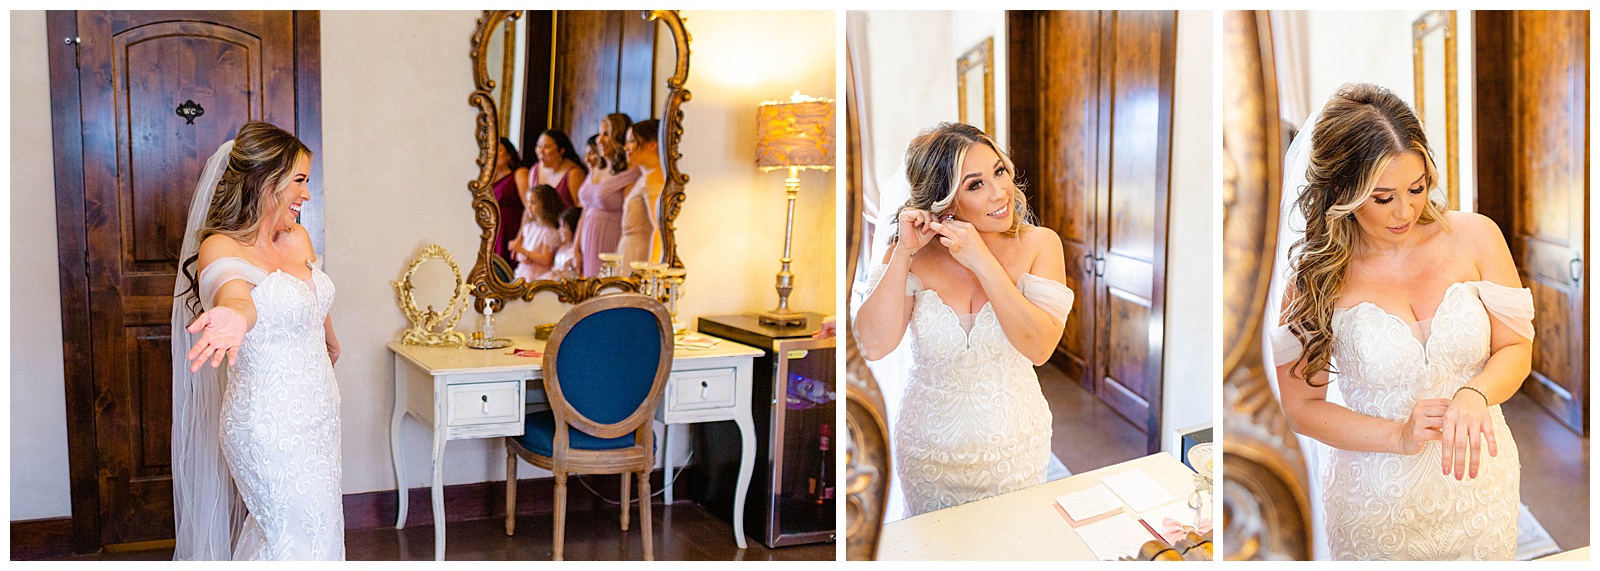 Ma Maison Getting Ready Bridal Photos by Indy Pop photo